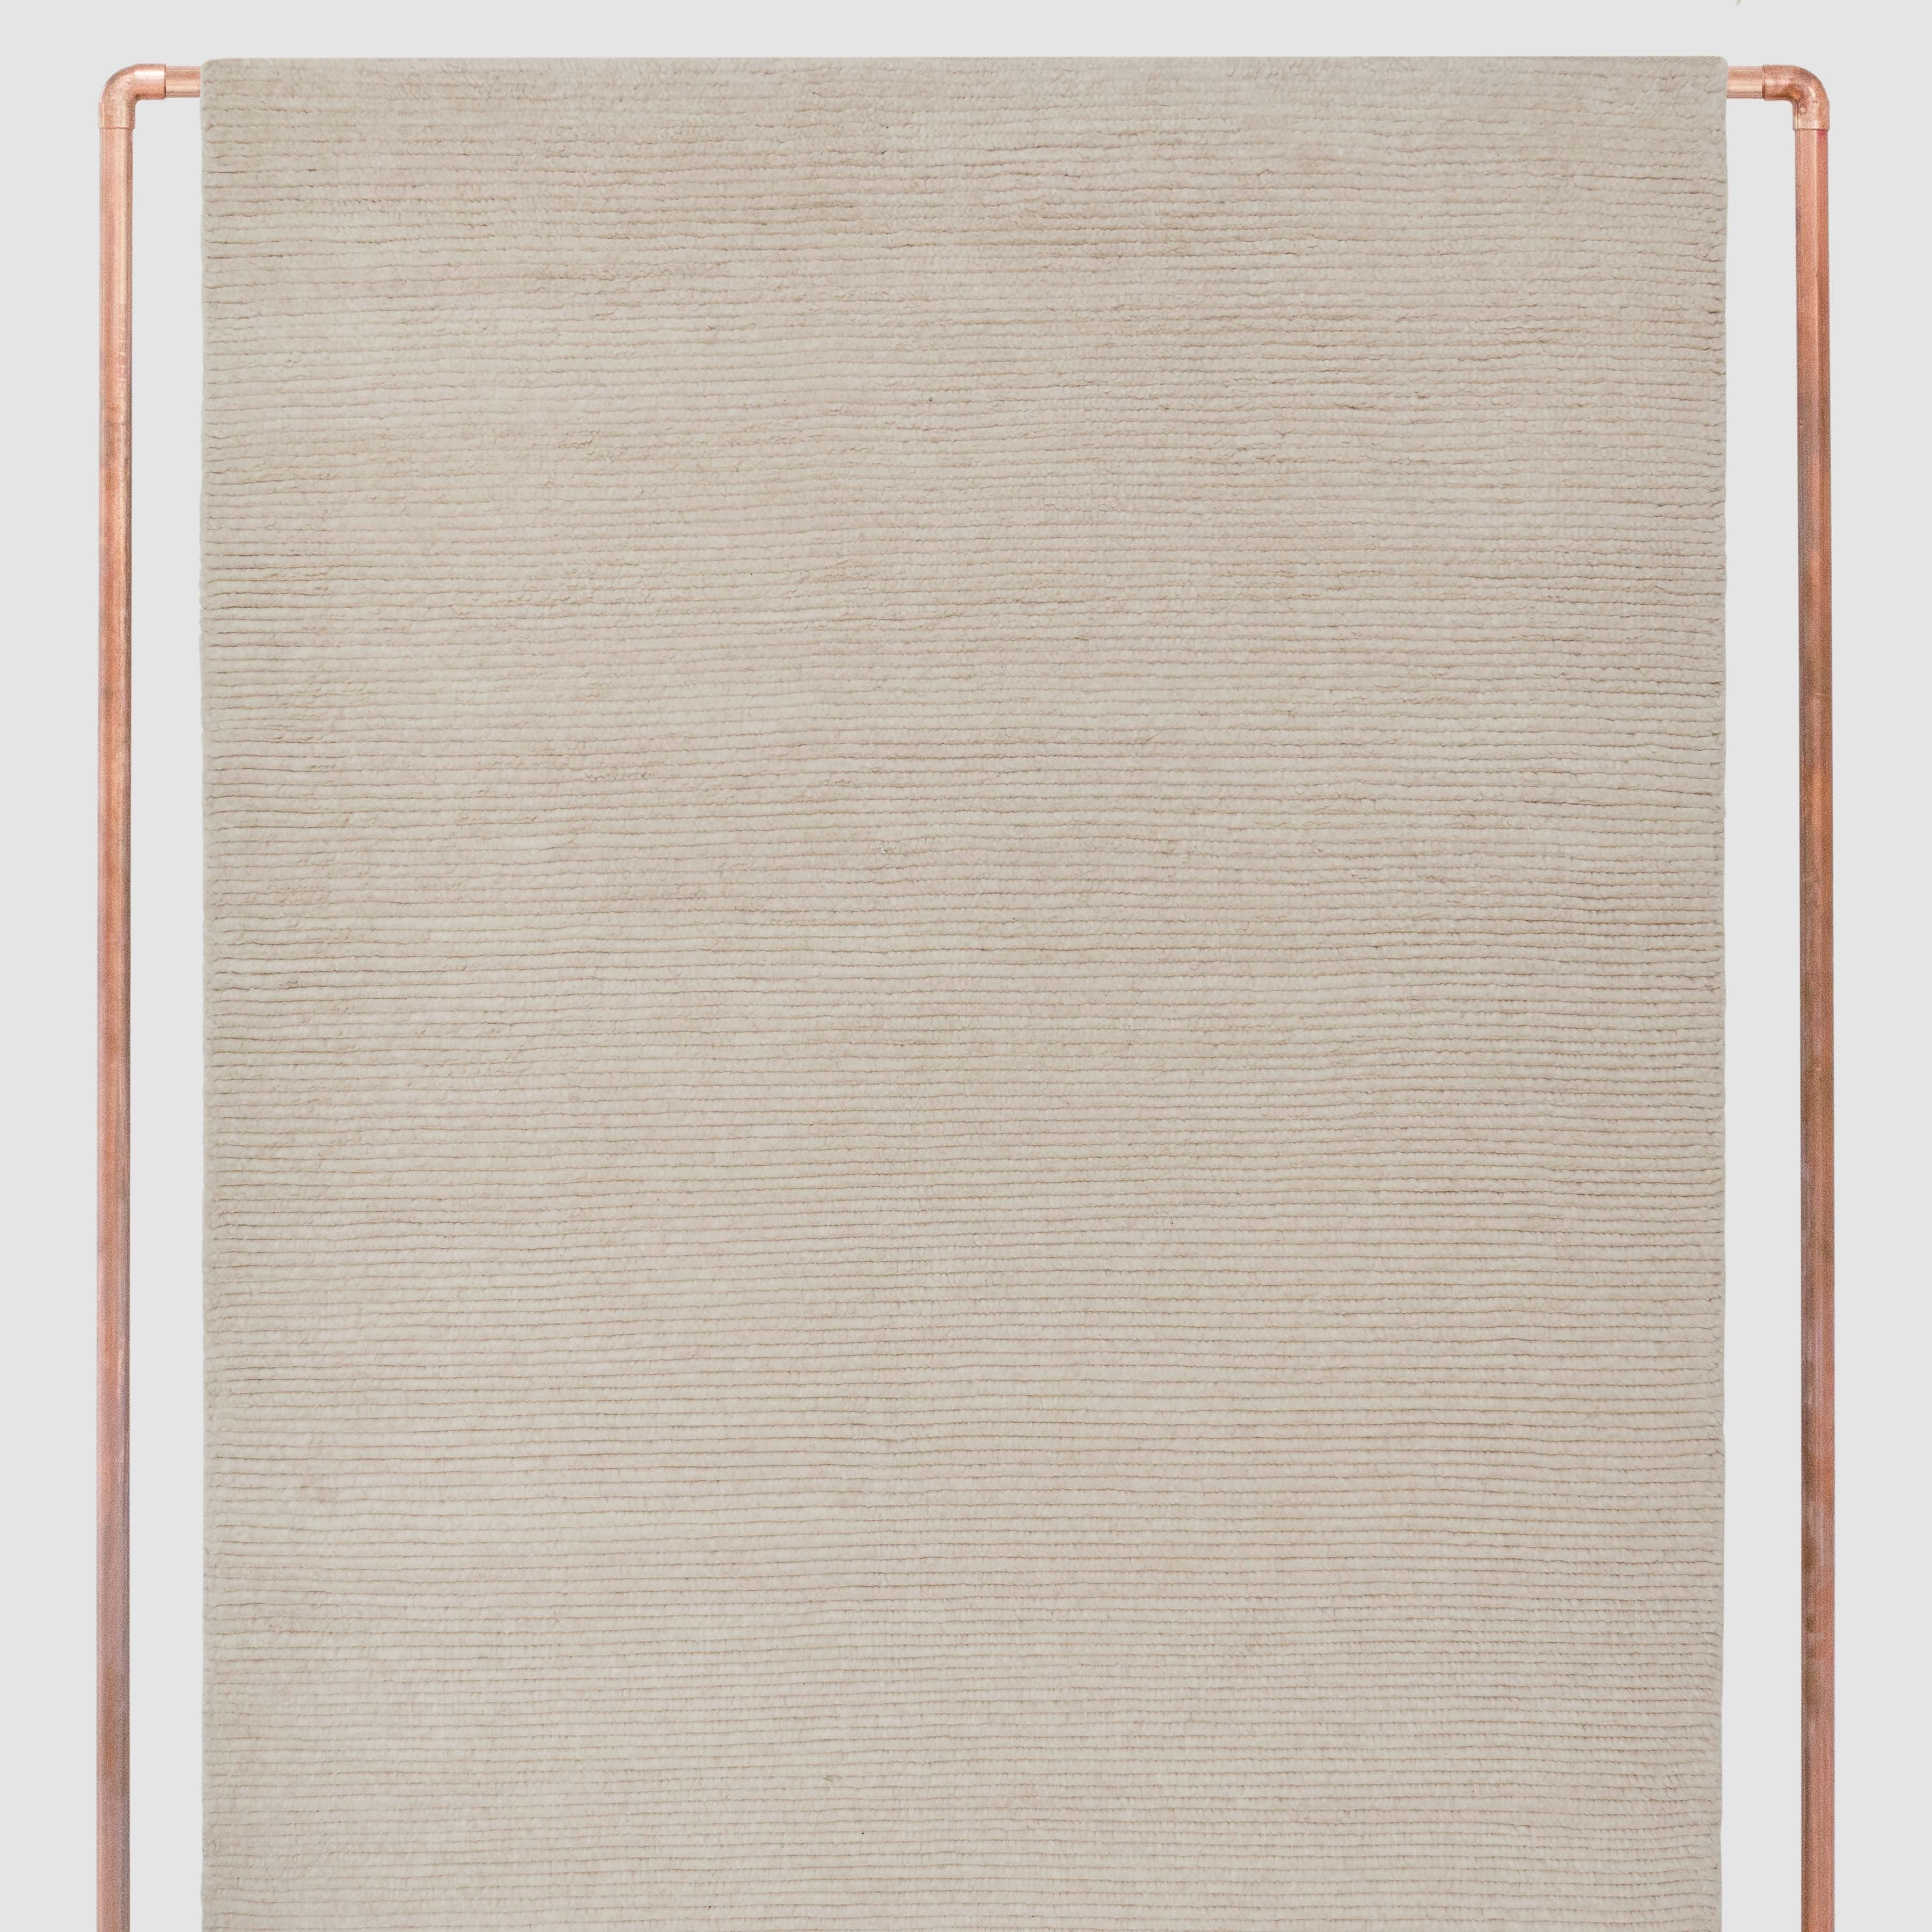 The Citizenry Lata Hand-Knotted Area Rug | 6' x 9' | Browns Tans - Image 1